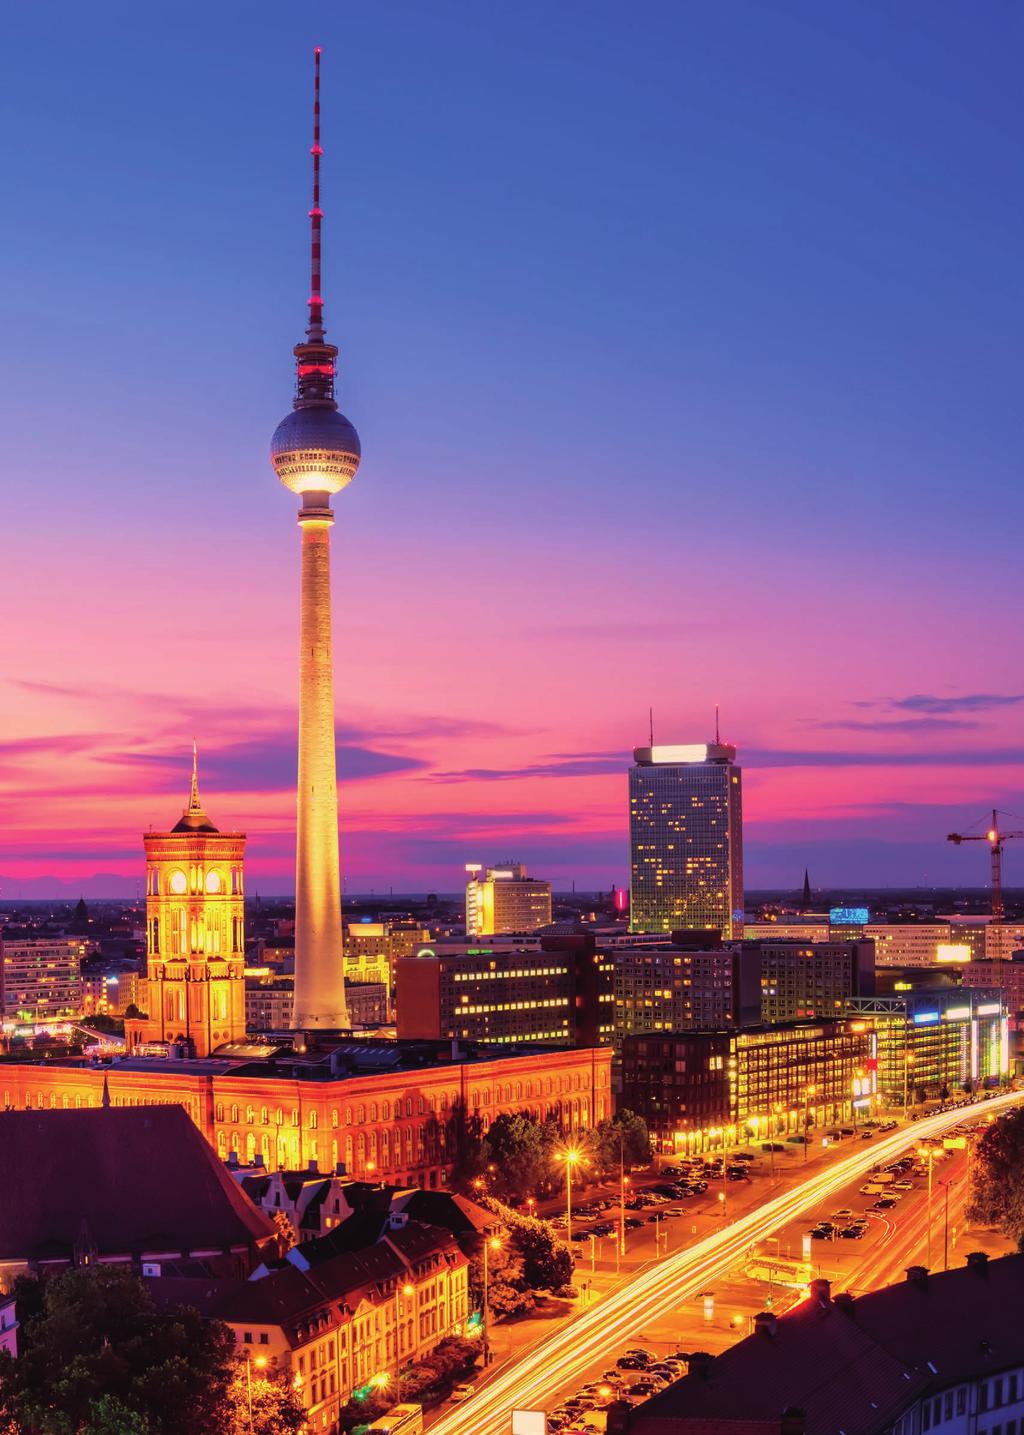 << Inhalt NEW VENUE Becoming more exciting. SEPAWA moves to the capital of Germany Berlin! 45% MORE EXHIBITION SPACE We have the growth factor. Over 4,600 sqm just for your company presentation!